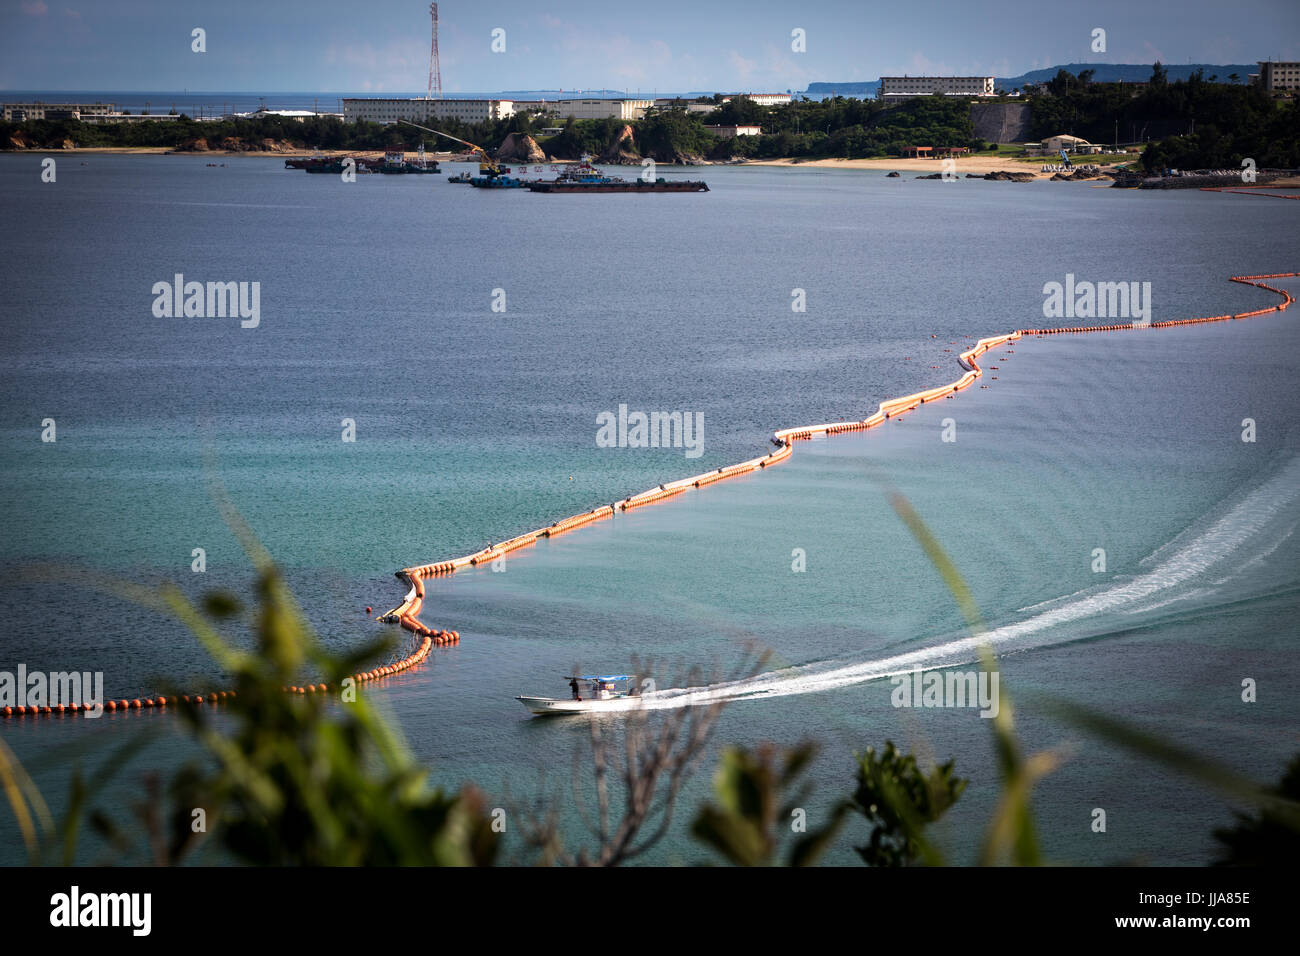 OKINAWA, JAPAN - JULY 13: A view of the new U.S Marine Airbase construction site is seen on July 13, 2017 in Oura bay, Henoko, Nago, Okinawa prefecture, Japan. Over the next five years, a new facility will be built in the waters off the coast from Camp Schwab as part of the relocation of the Futenma Air Station to the Henoko area on the island of Okinawa. Credit: Richard Atrero de Guzman/AFLO/Alamy Live News Stock Photo